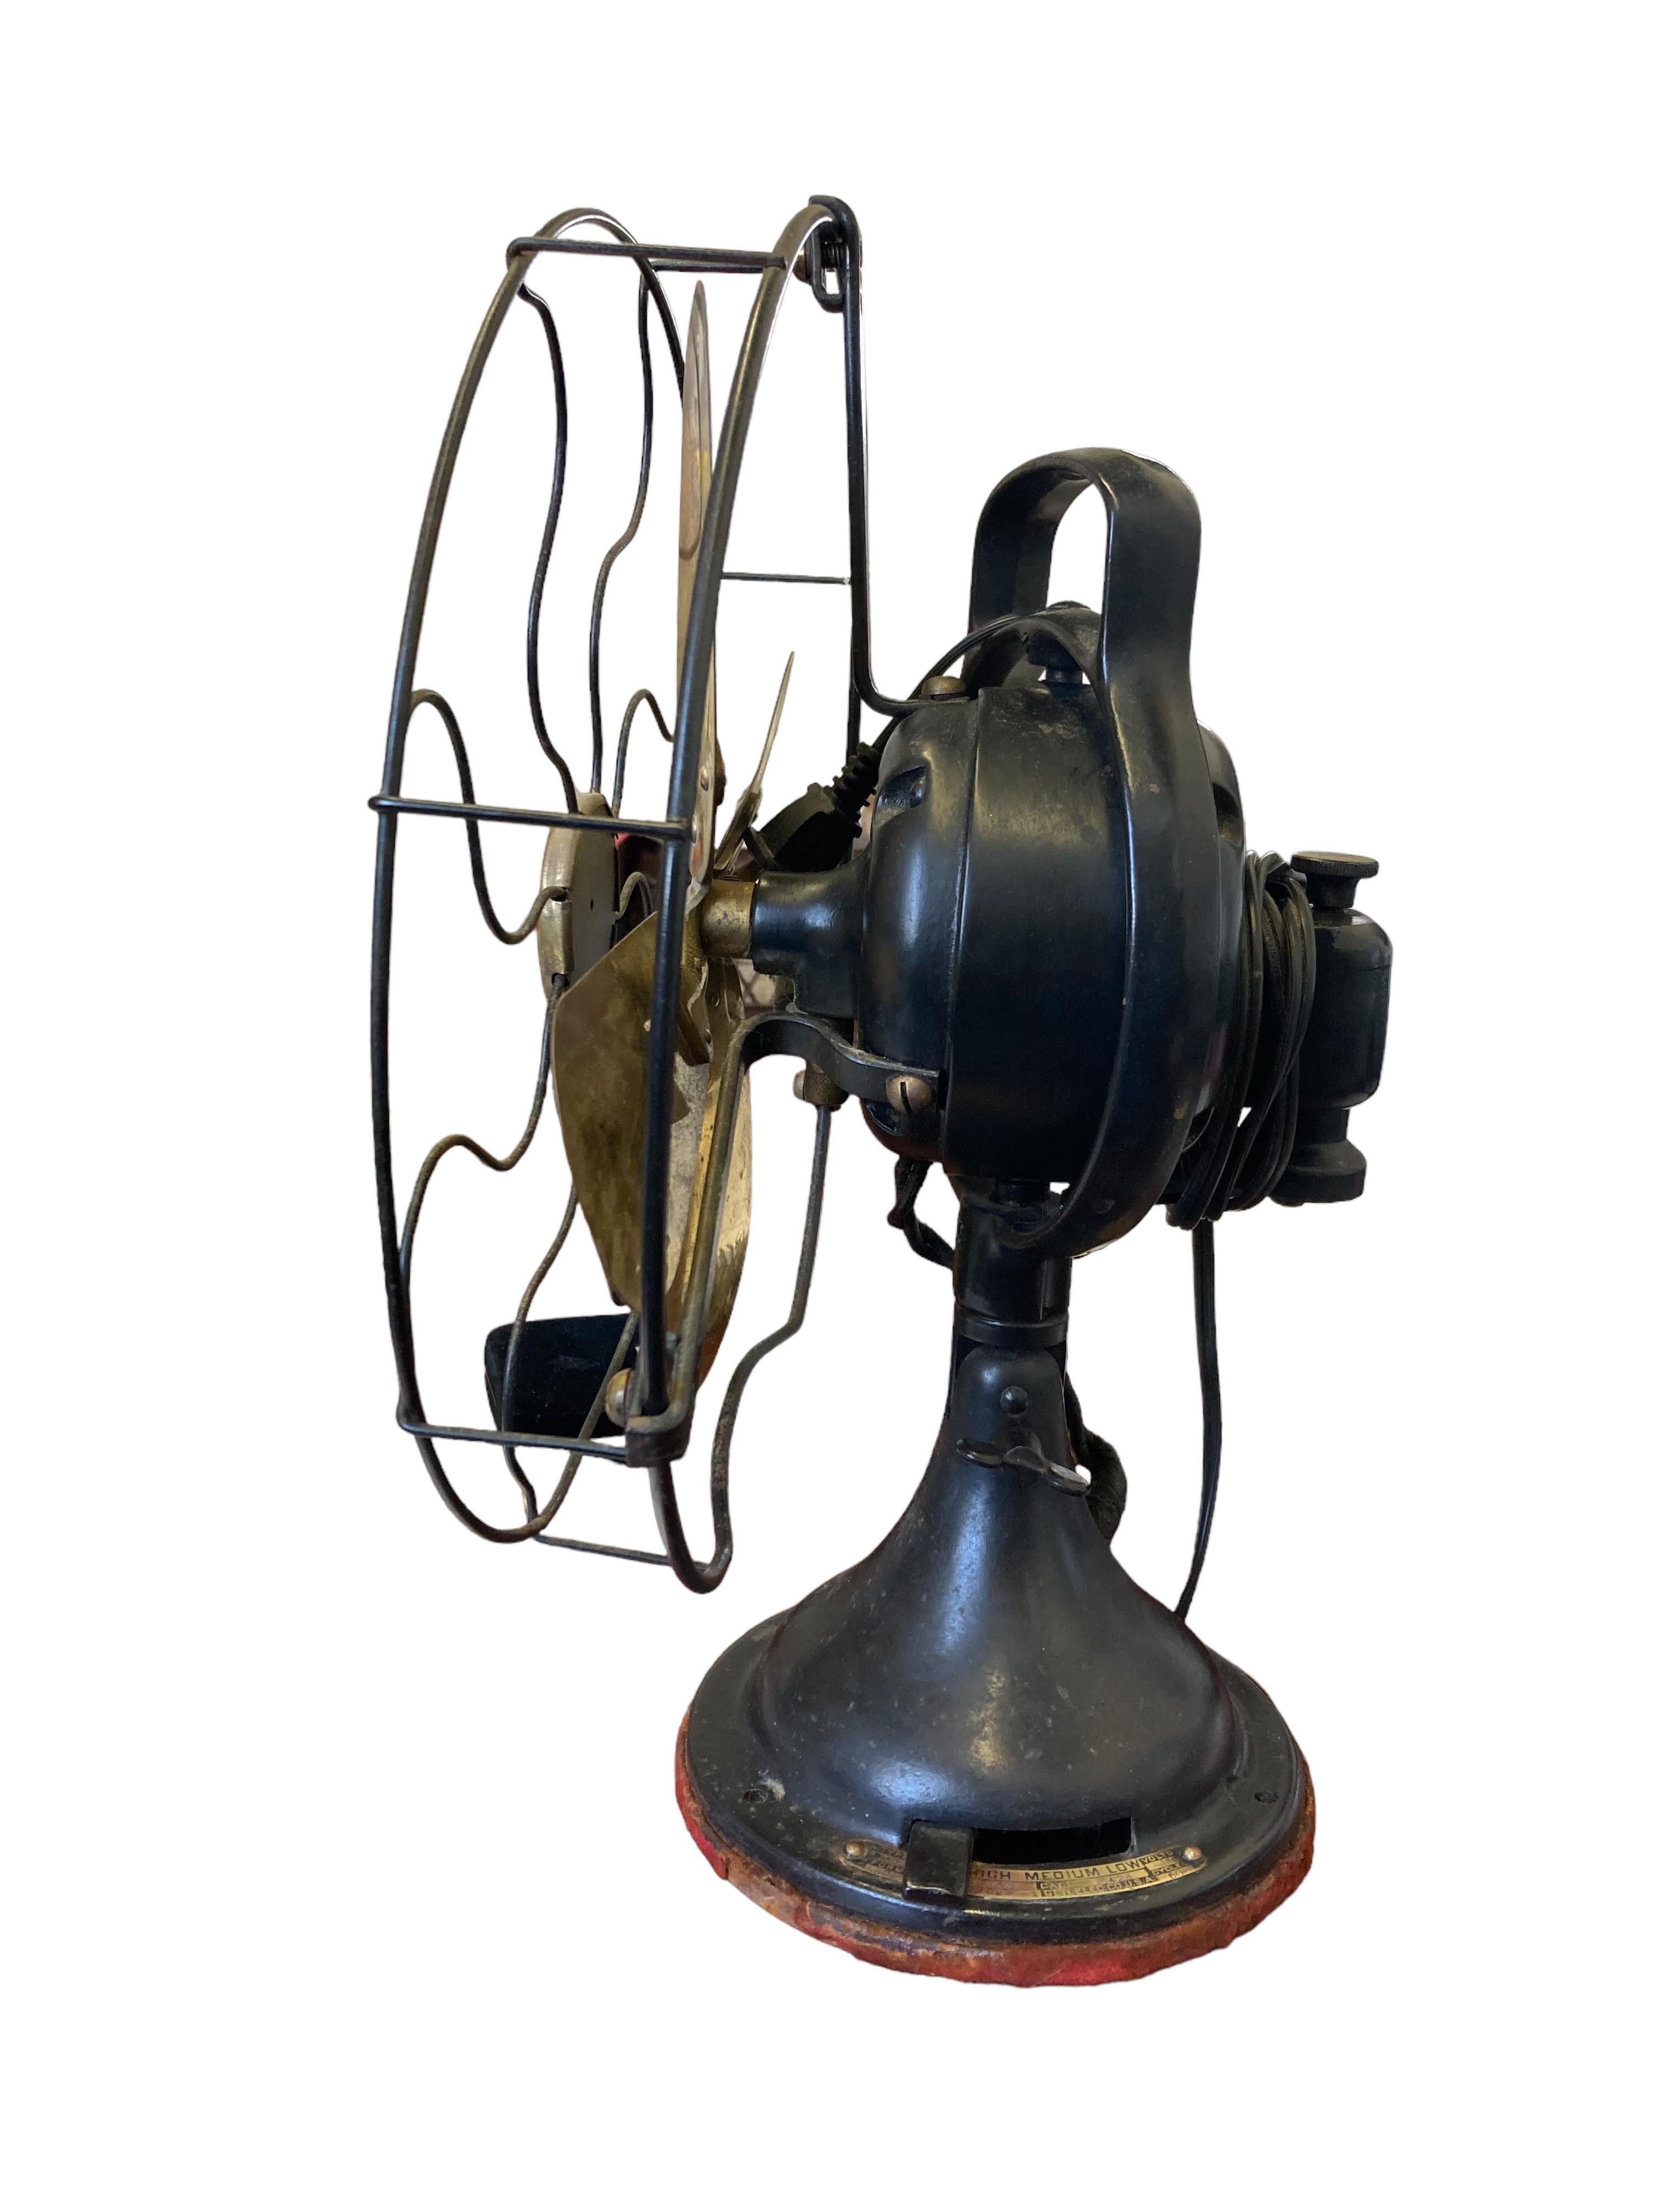 This early 20th century General Electric brass blade table fan was fully restored to peak functionality. The front of the fan measures 13” across and each of the four blades measures 5 1/2” in length. Height is 16”. The original, red felt base is in